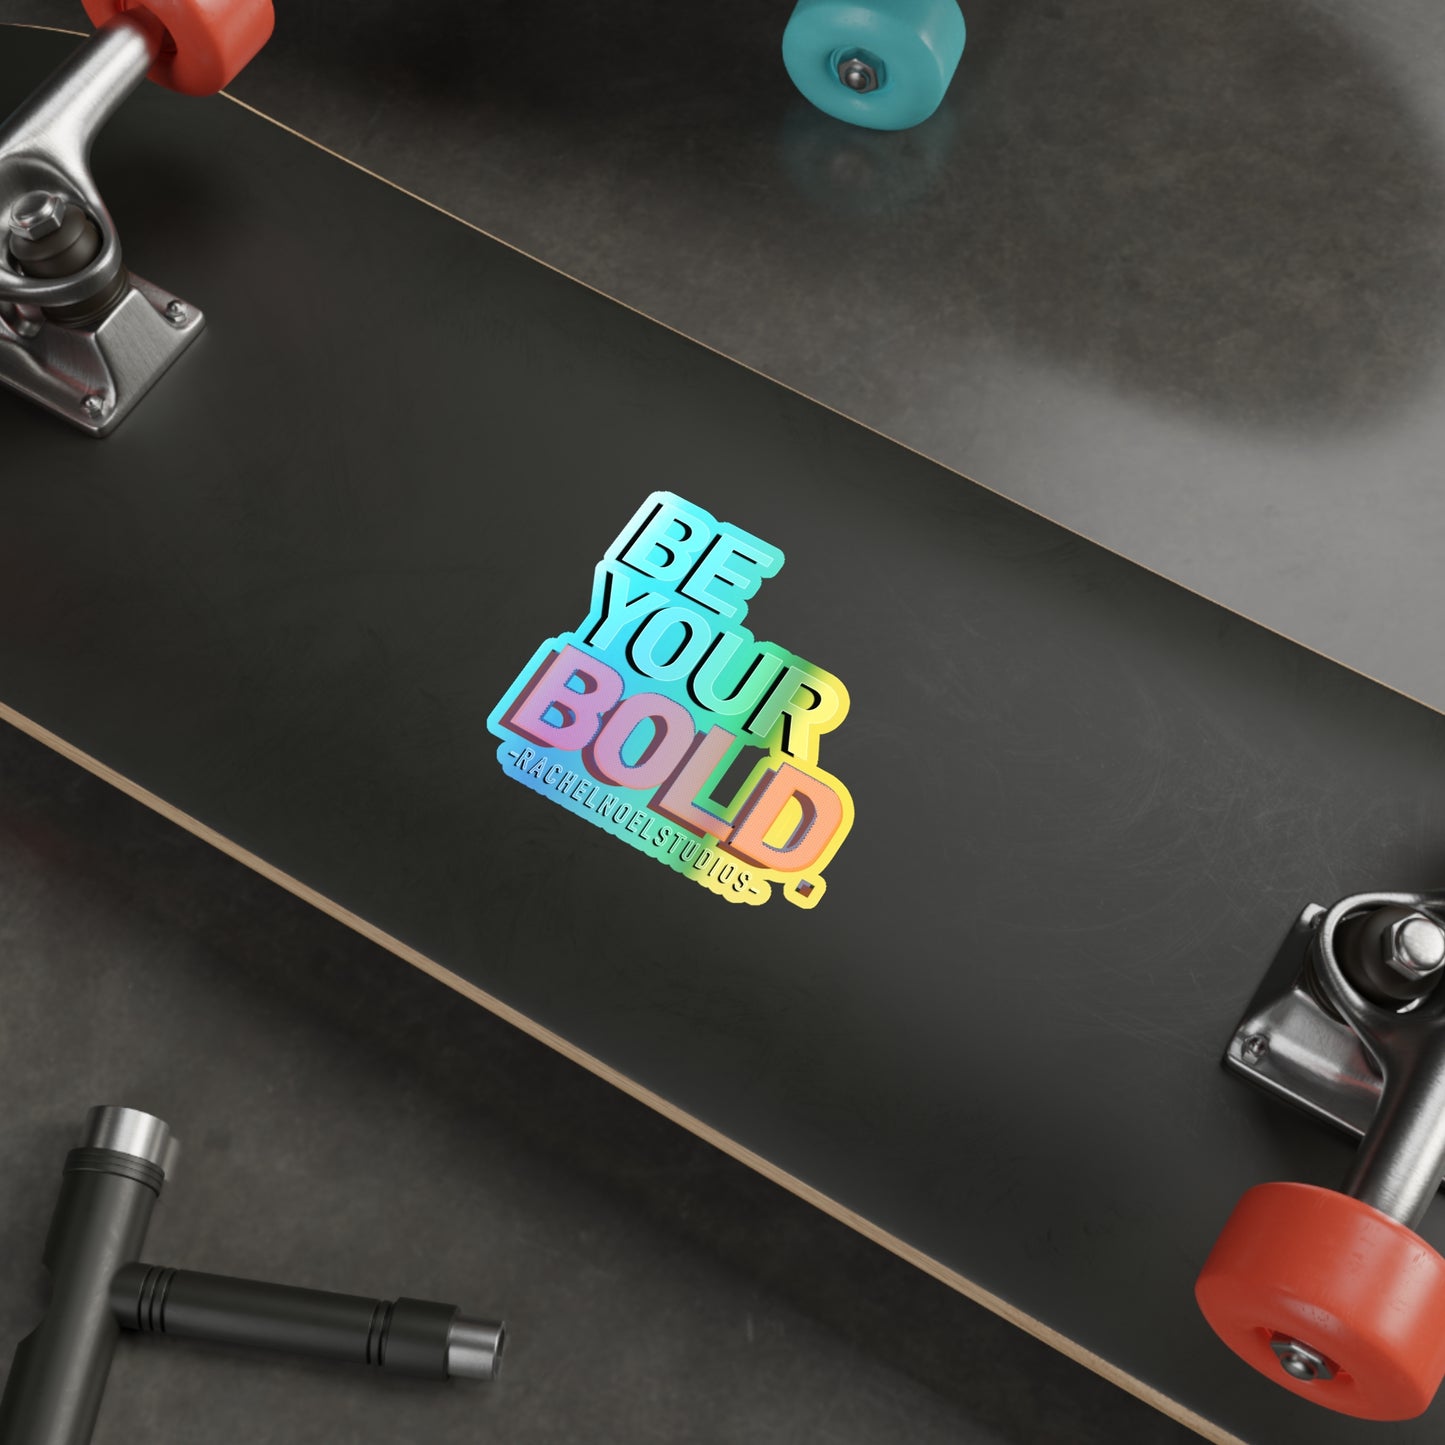 “Be Your Bold” RNS Holographic Stickers